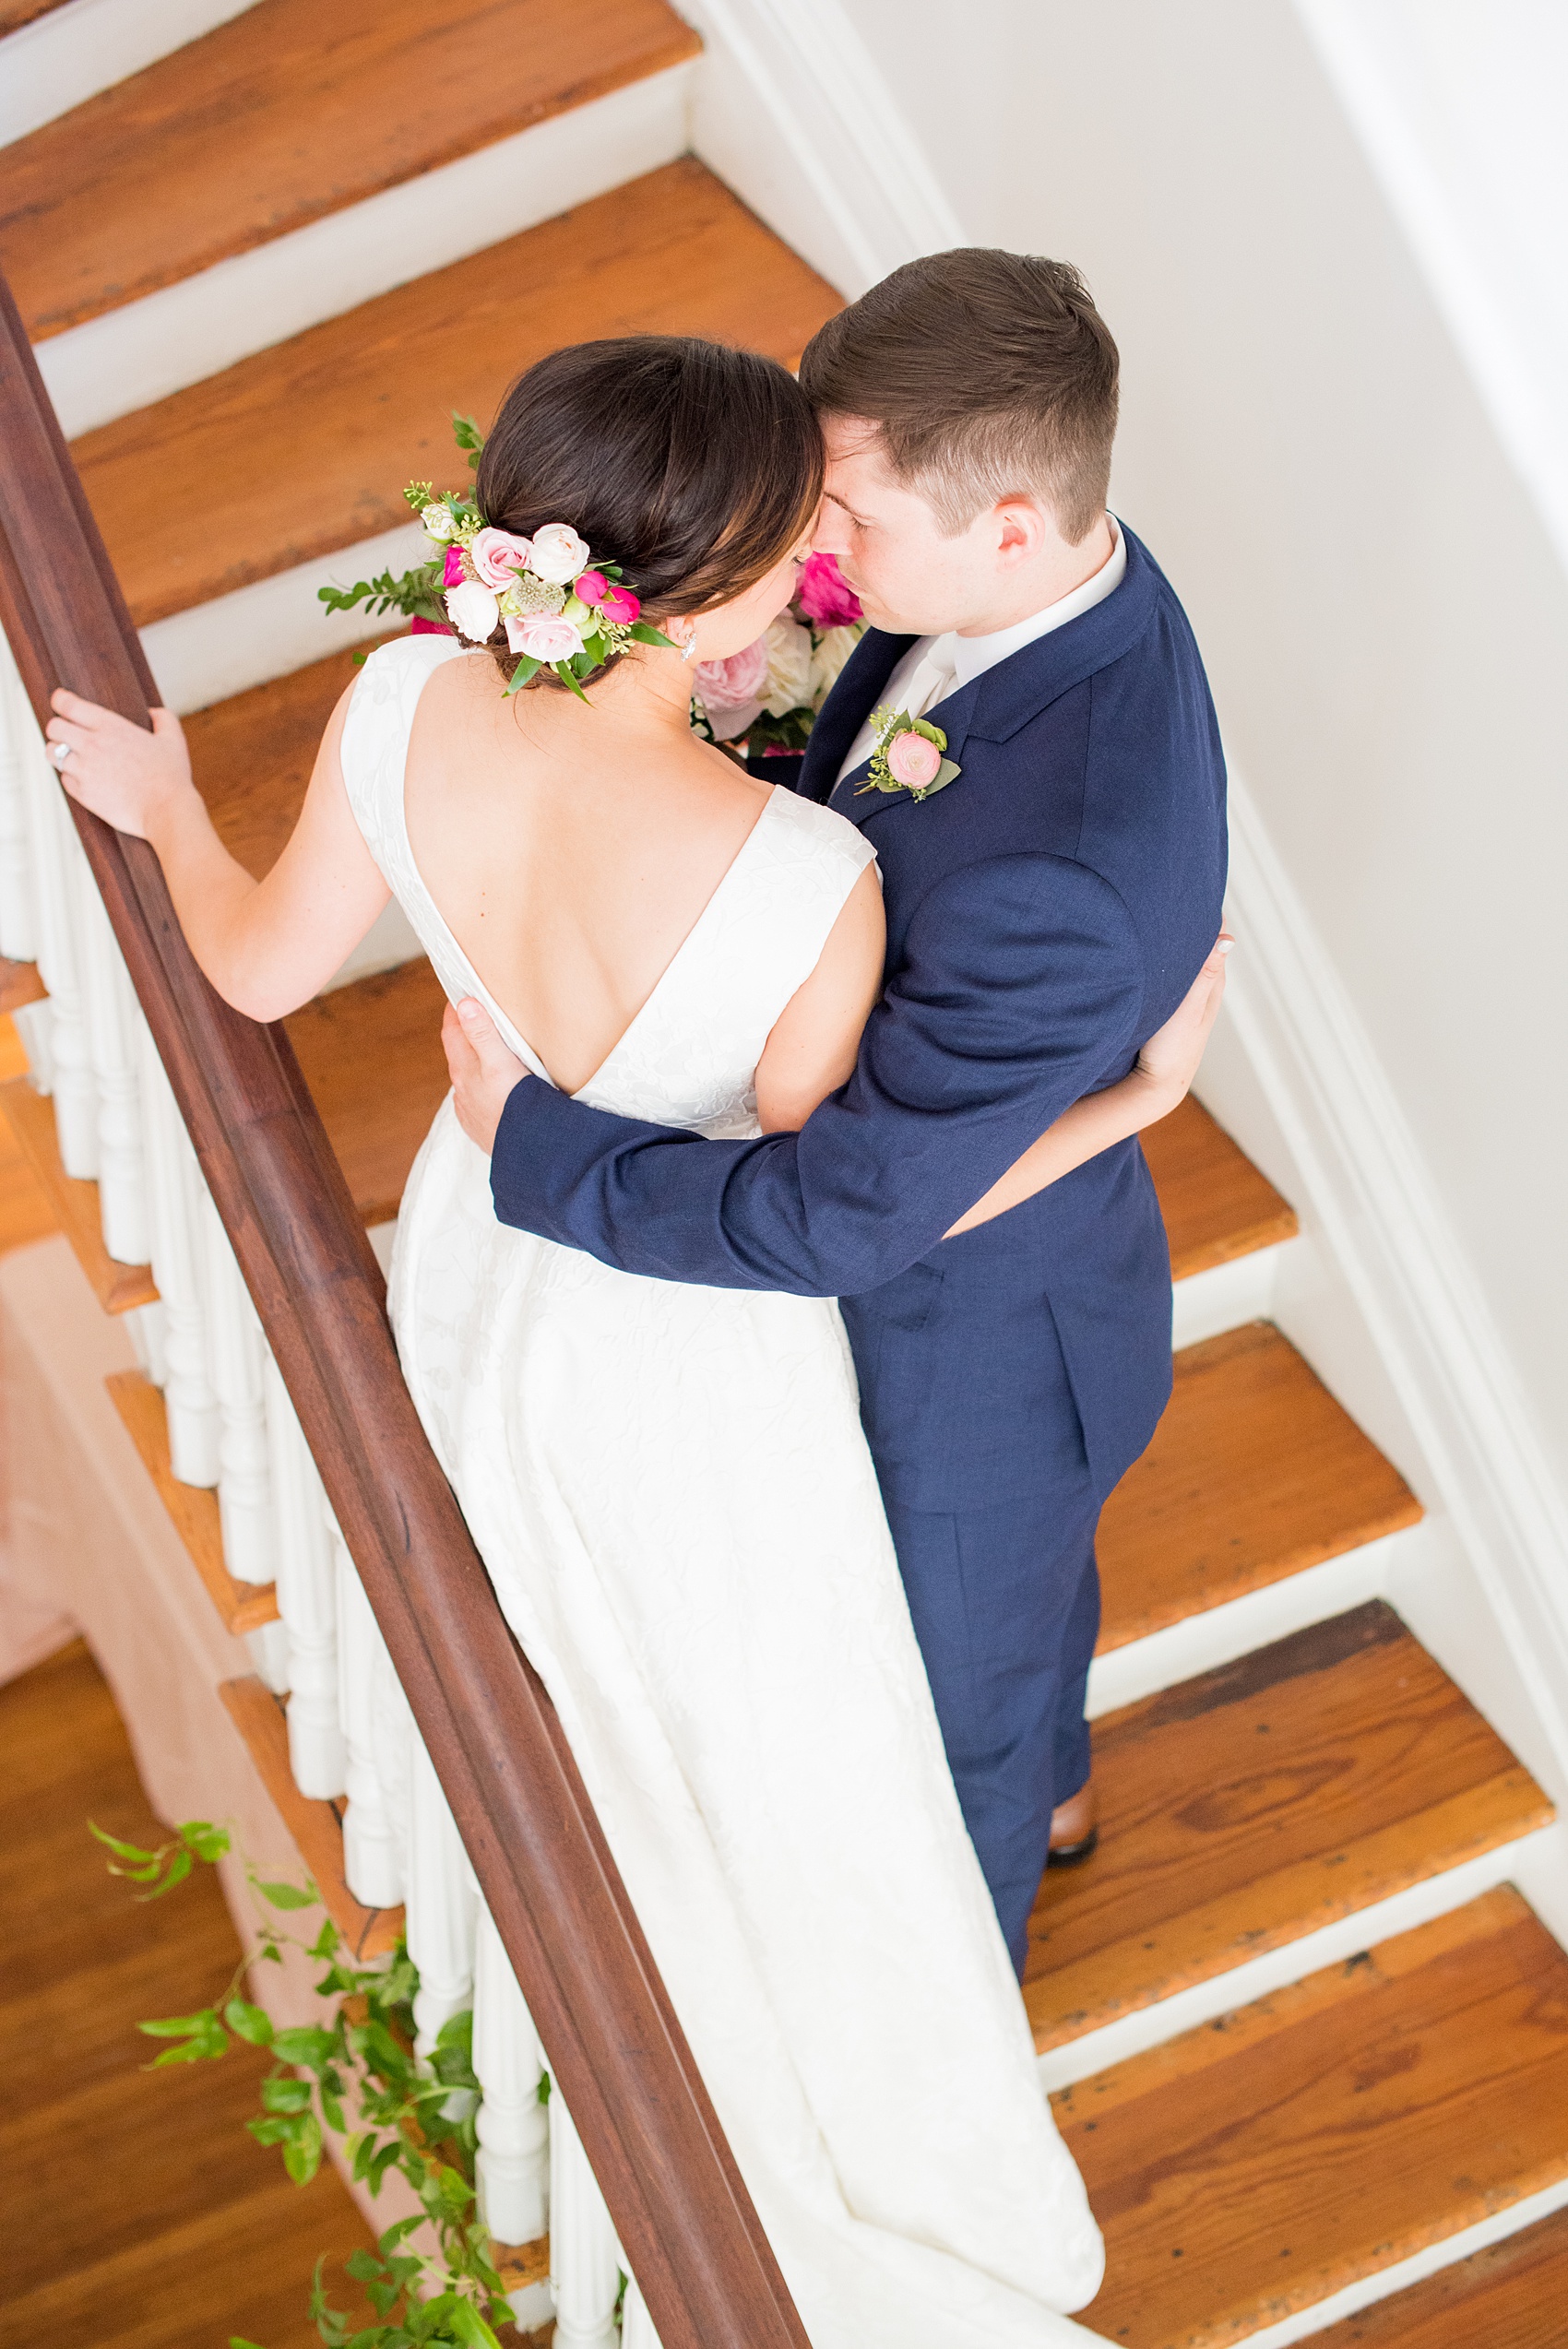 Mikkel Paige Photography pictures from a wedding at Merrimon-Wynne House in Raleigh, NC. Photo of the bride and groom on the stairs of the historic southern home.